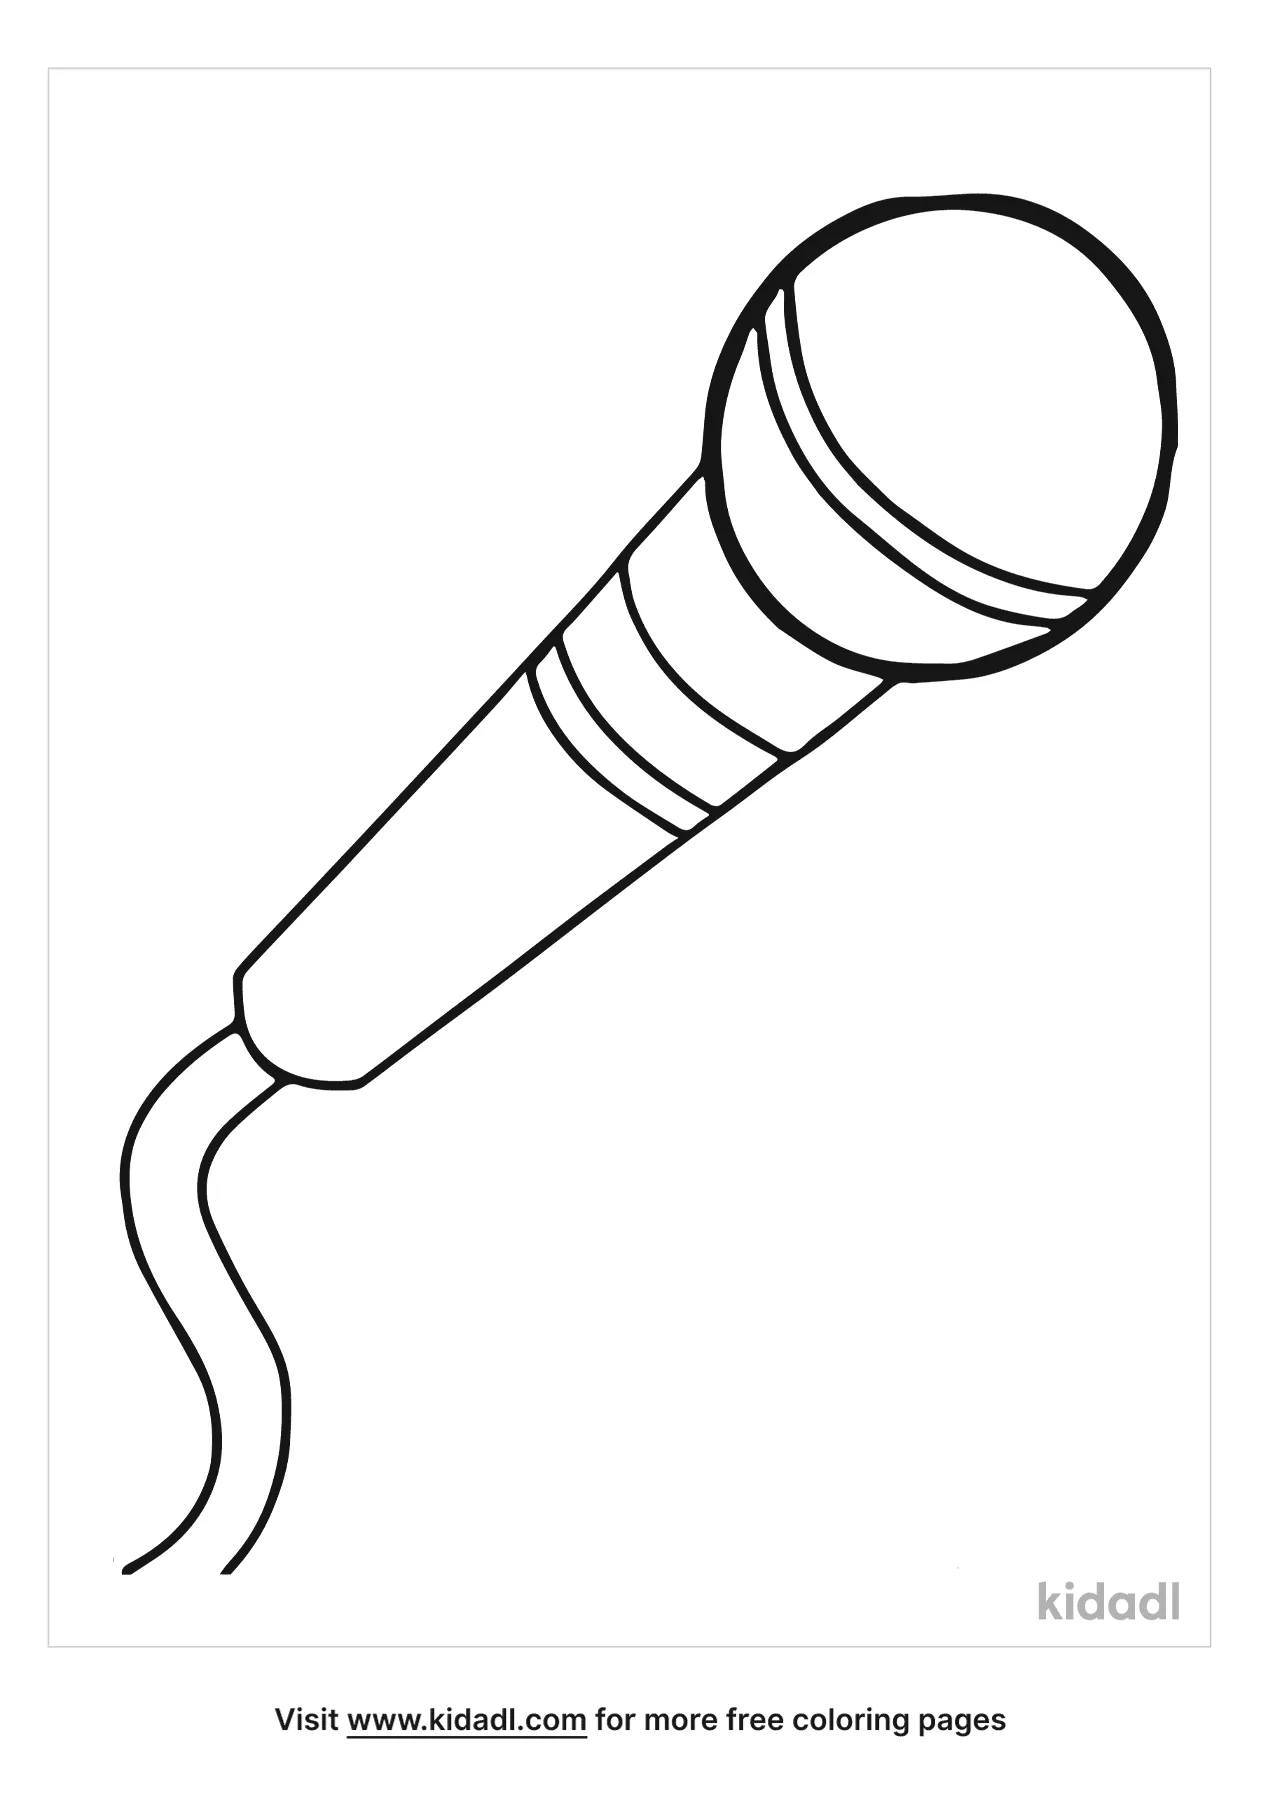 Free microphone coloring page coloring page printables